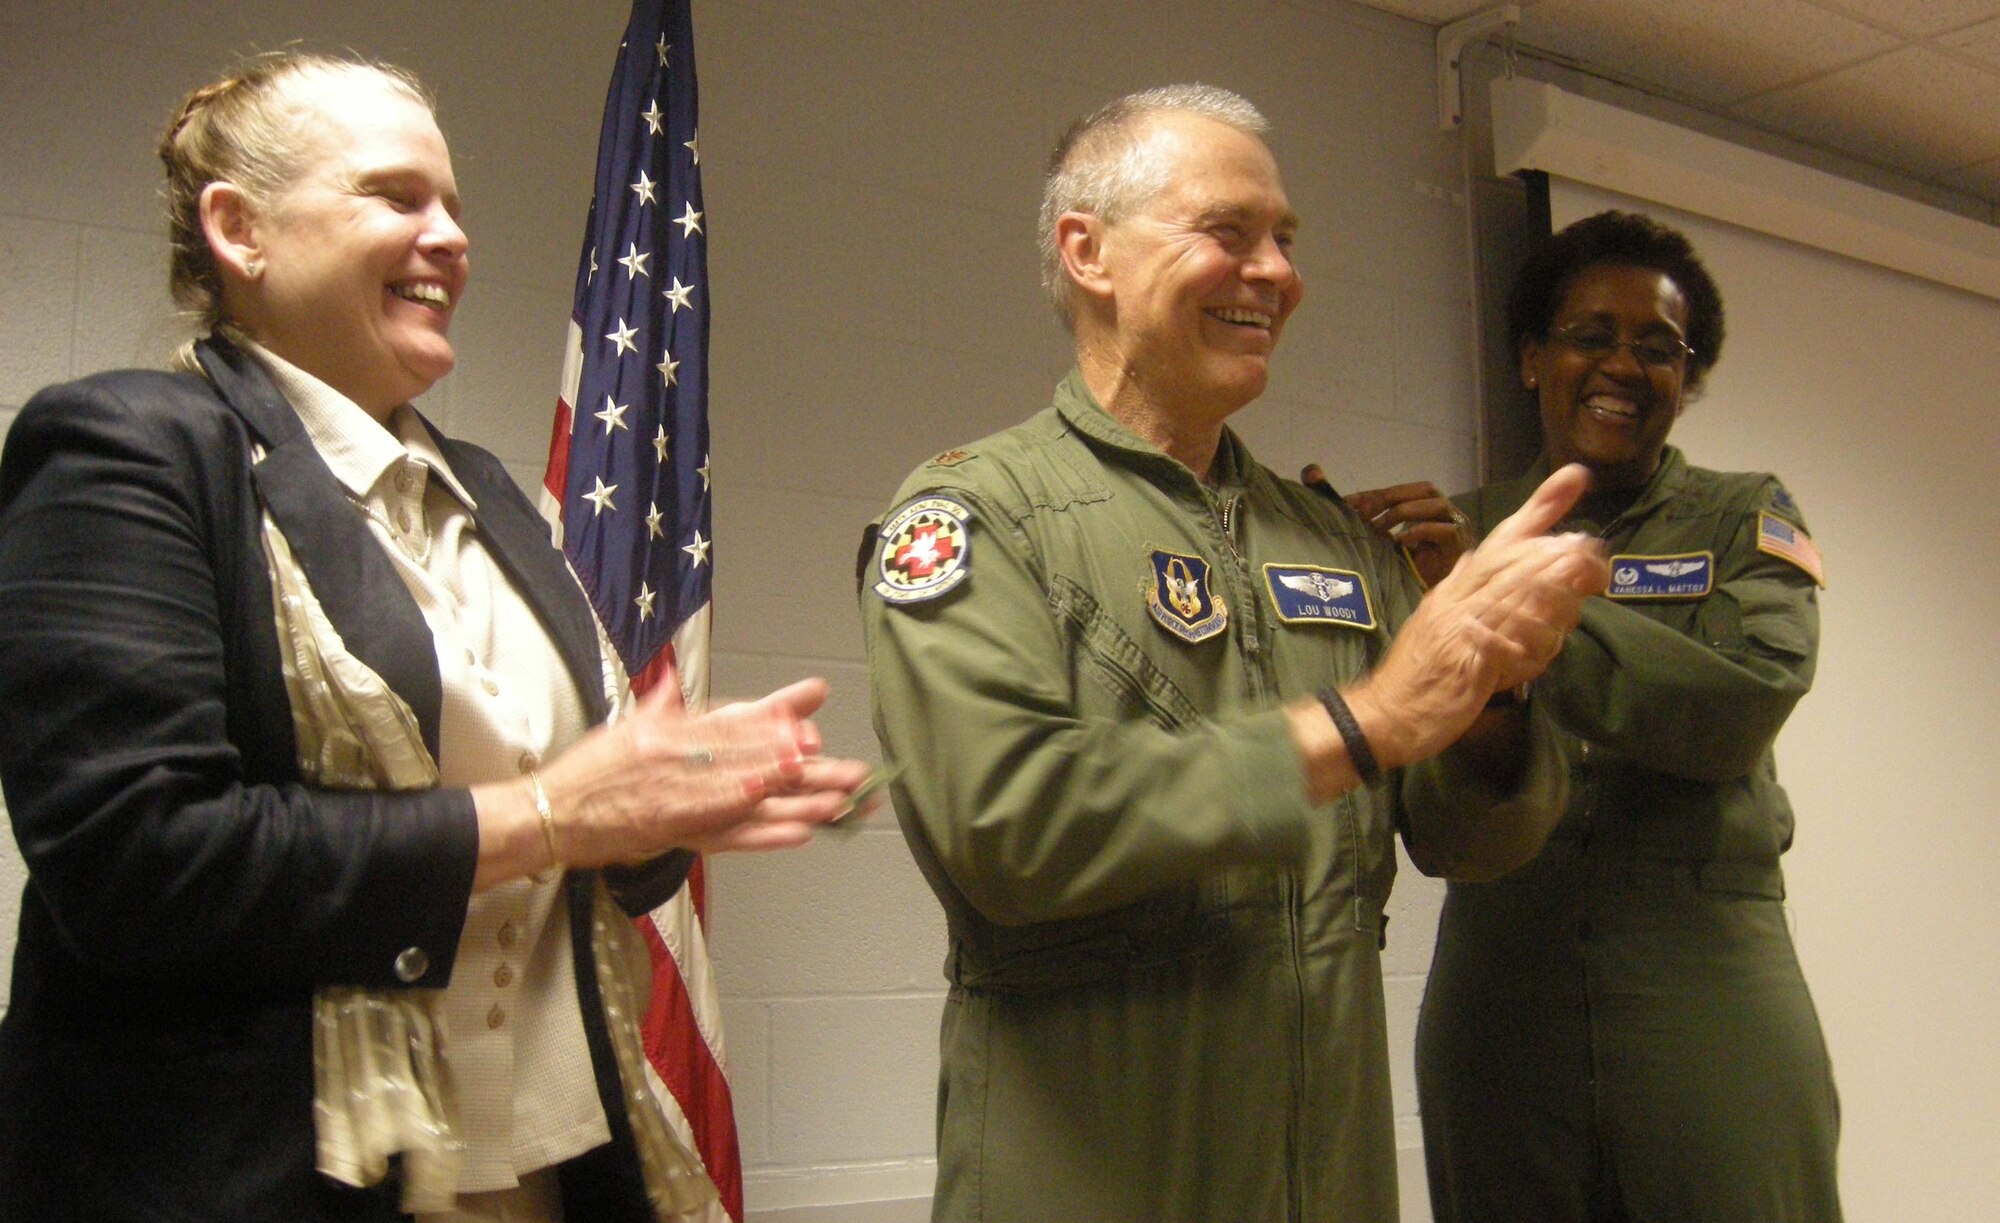 ANDREWS AIR FORCE BASE, Md. -- Lt. Col. Louie Woody, 459th Aeromedical Evacuation Squadron flight nurse, gets his new rank pinned on by spouse (left) Col. Kathleen Woody and Lt. Col. Vanessa Mattox, 459th AES commander, here Aug. 20. Colonel Woody's new rank is the result of a very rare accelerated promotion that requires a member to be in a position commensurate with the rank to which they are promoted. The member's commander requests permission for the member to pin on the rank at a date earlier than the selection board has assigned the member. In this case, the 64-year-old prior enlisted Colonel Woody pinned on many months before he expected to. (U.S. Air Force photo/Tech. Sgt. Amaani Lyle)